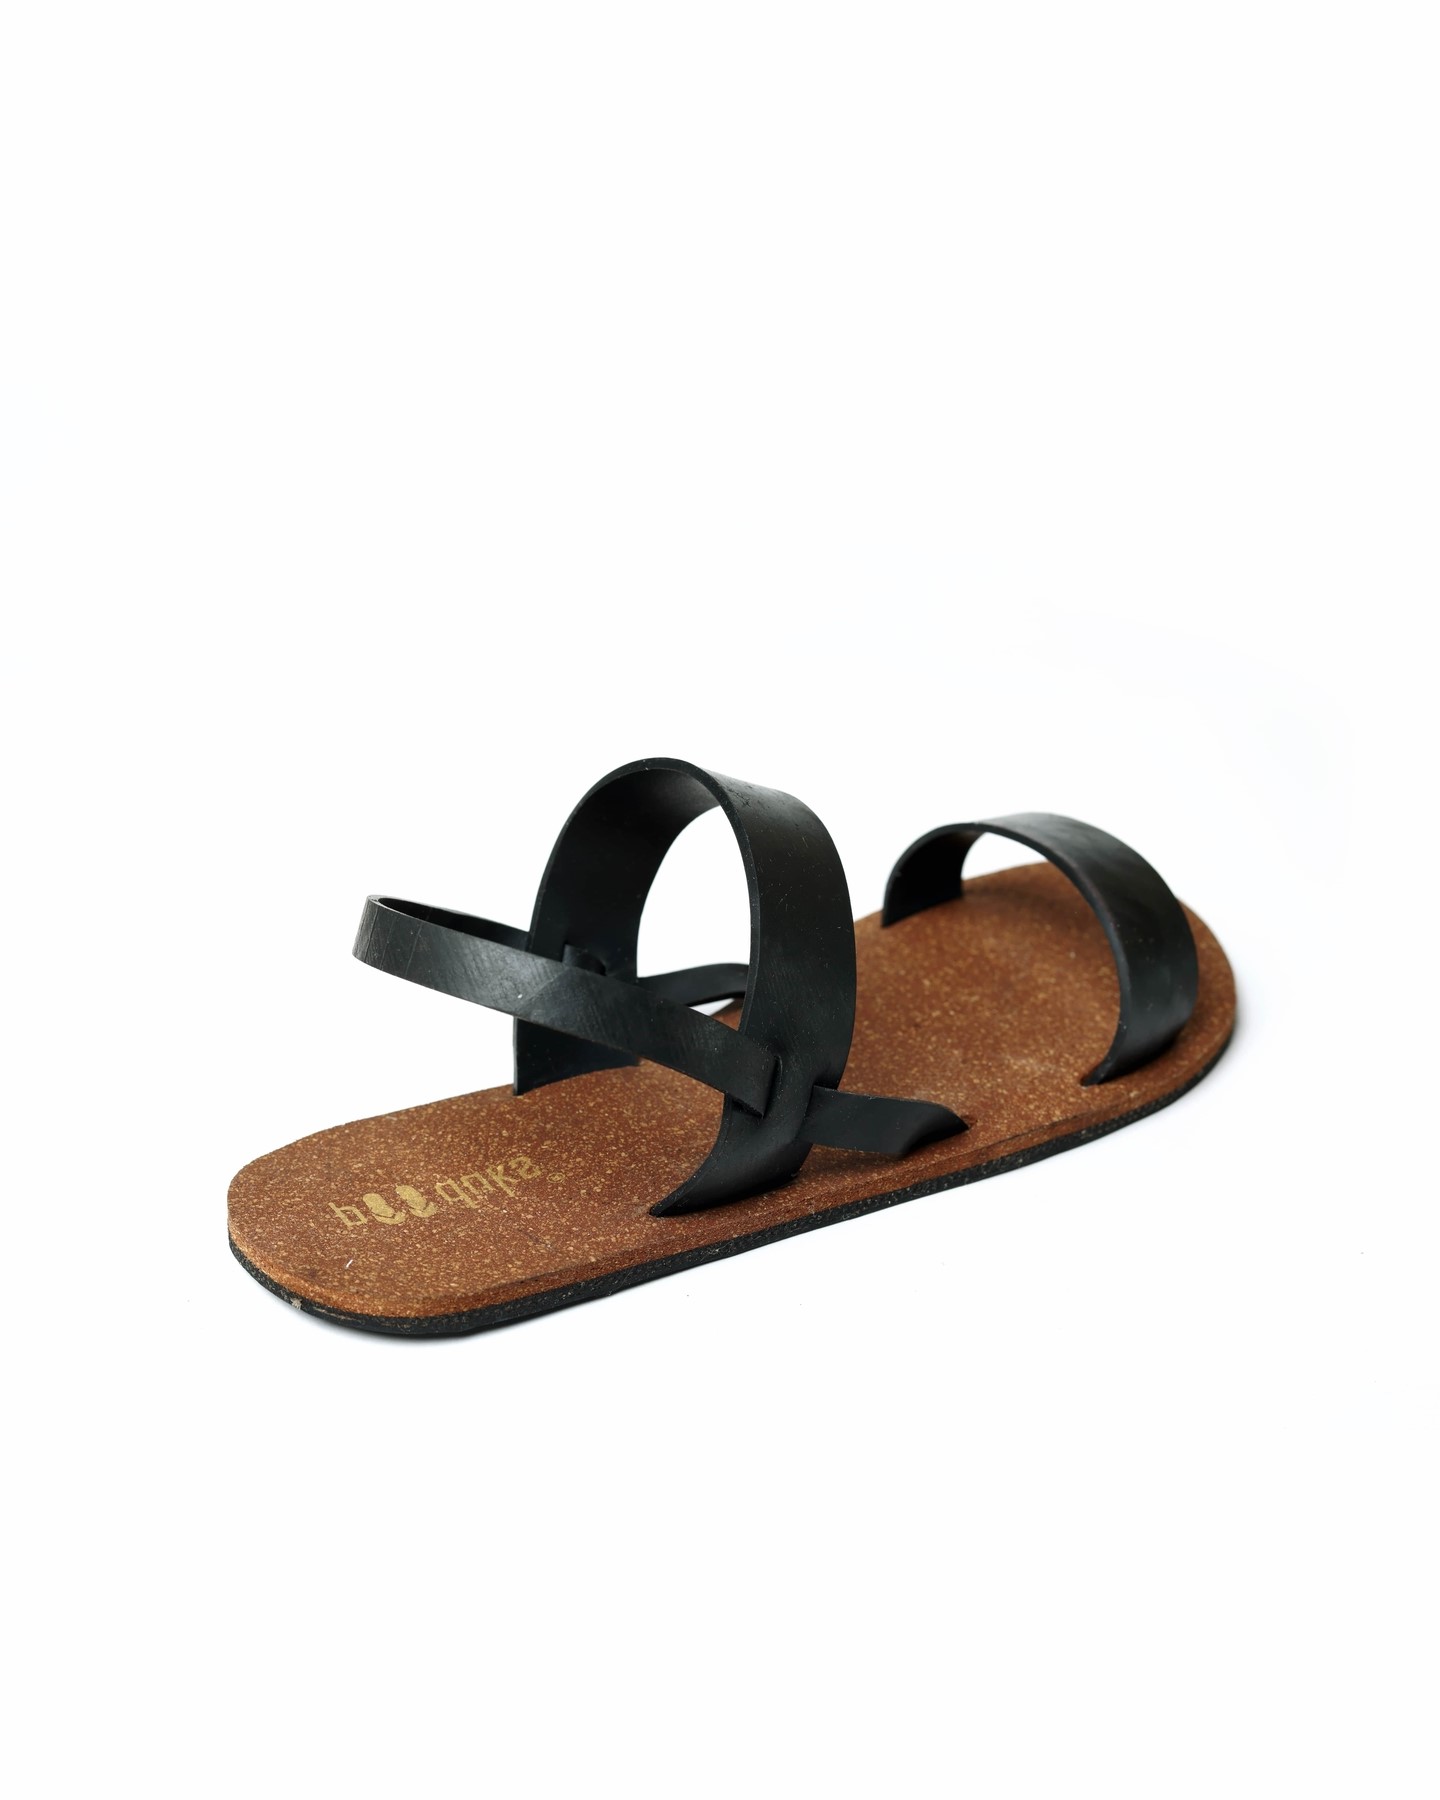 Product: Paaduks Solid Black Sade Sandals For Women